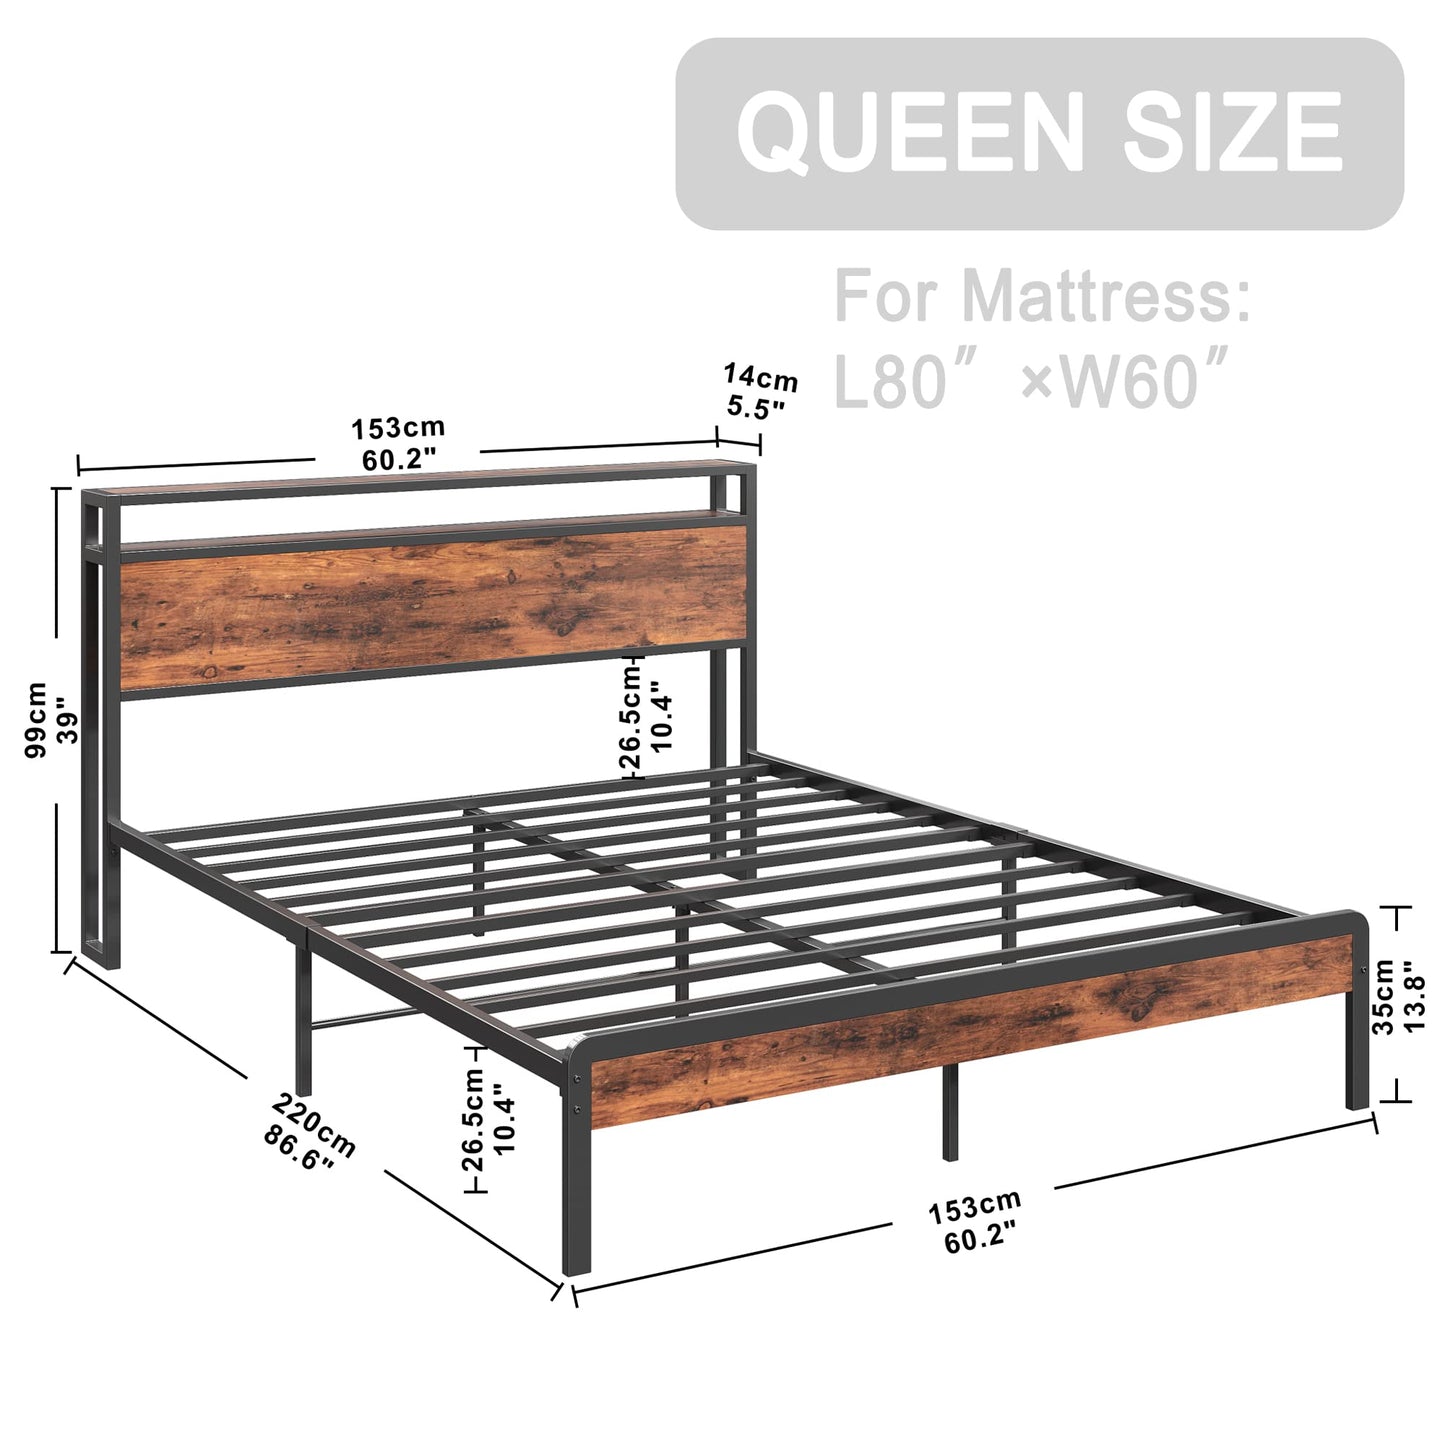 LIKIMIO Queen Bed Frame, Platform Bed Frame with 2-Tier Storage Headboard and Strong Support Legs, More Sturdy, Noise-Free, No Box Spring Needed,